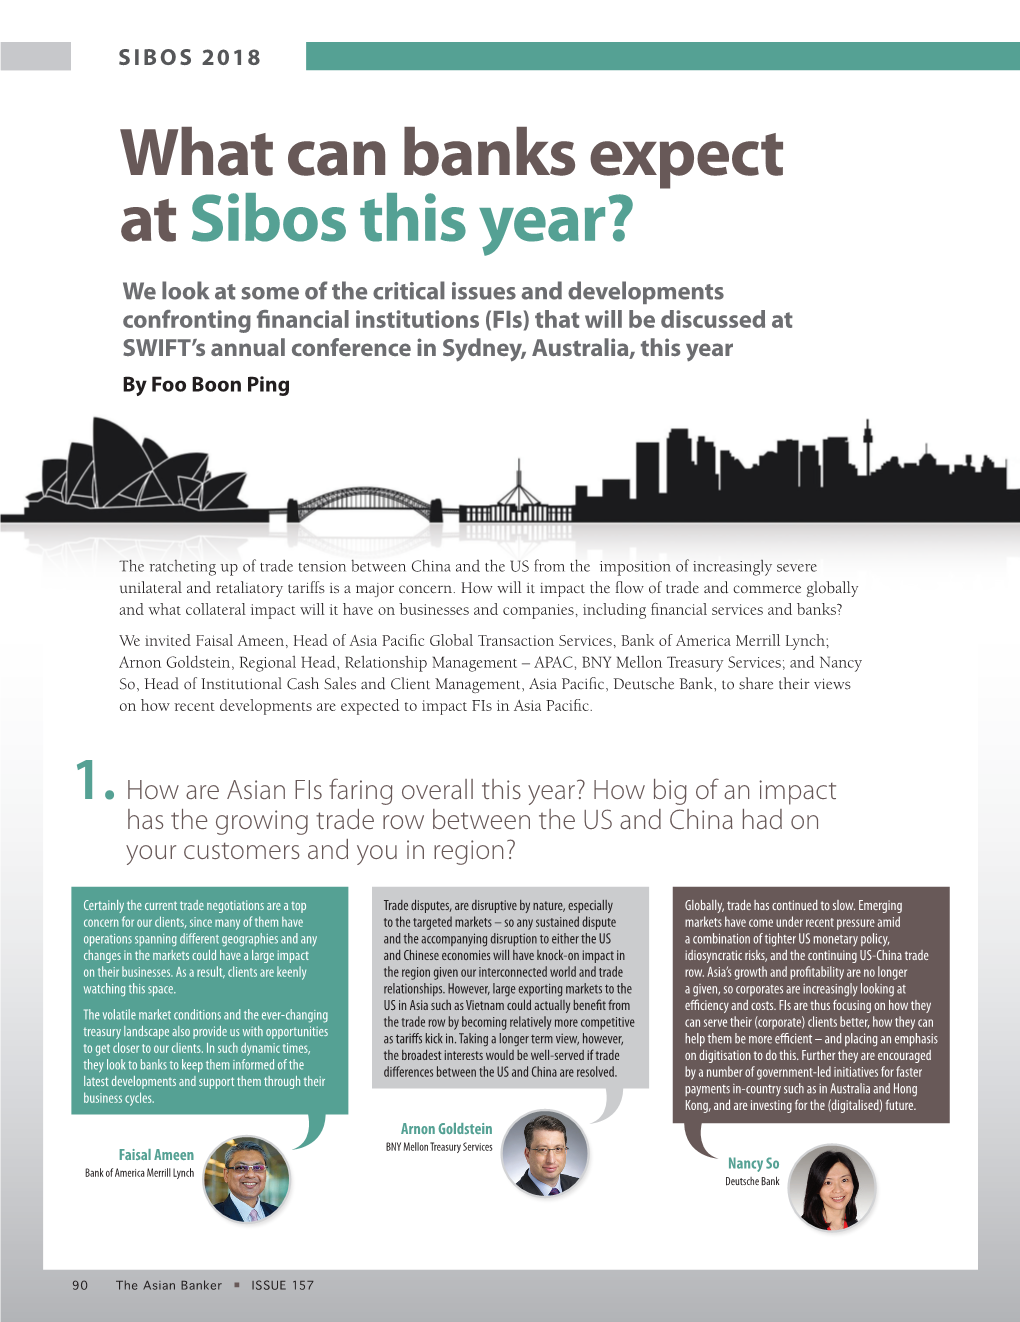 What Can Banks Expect at Sibos This Year?